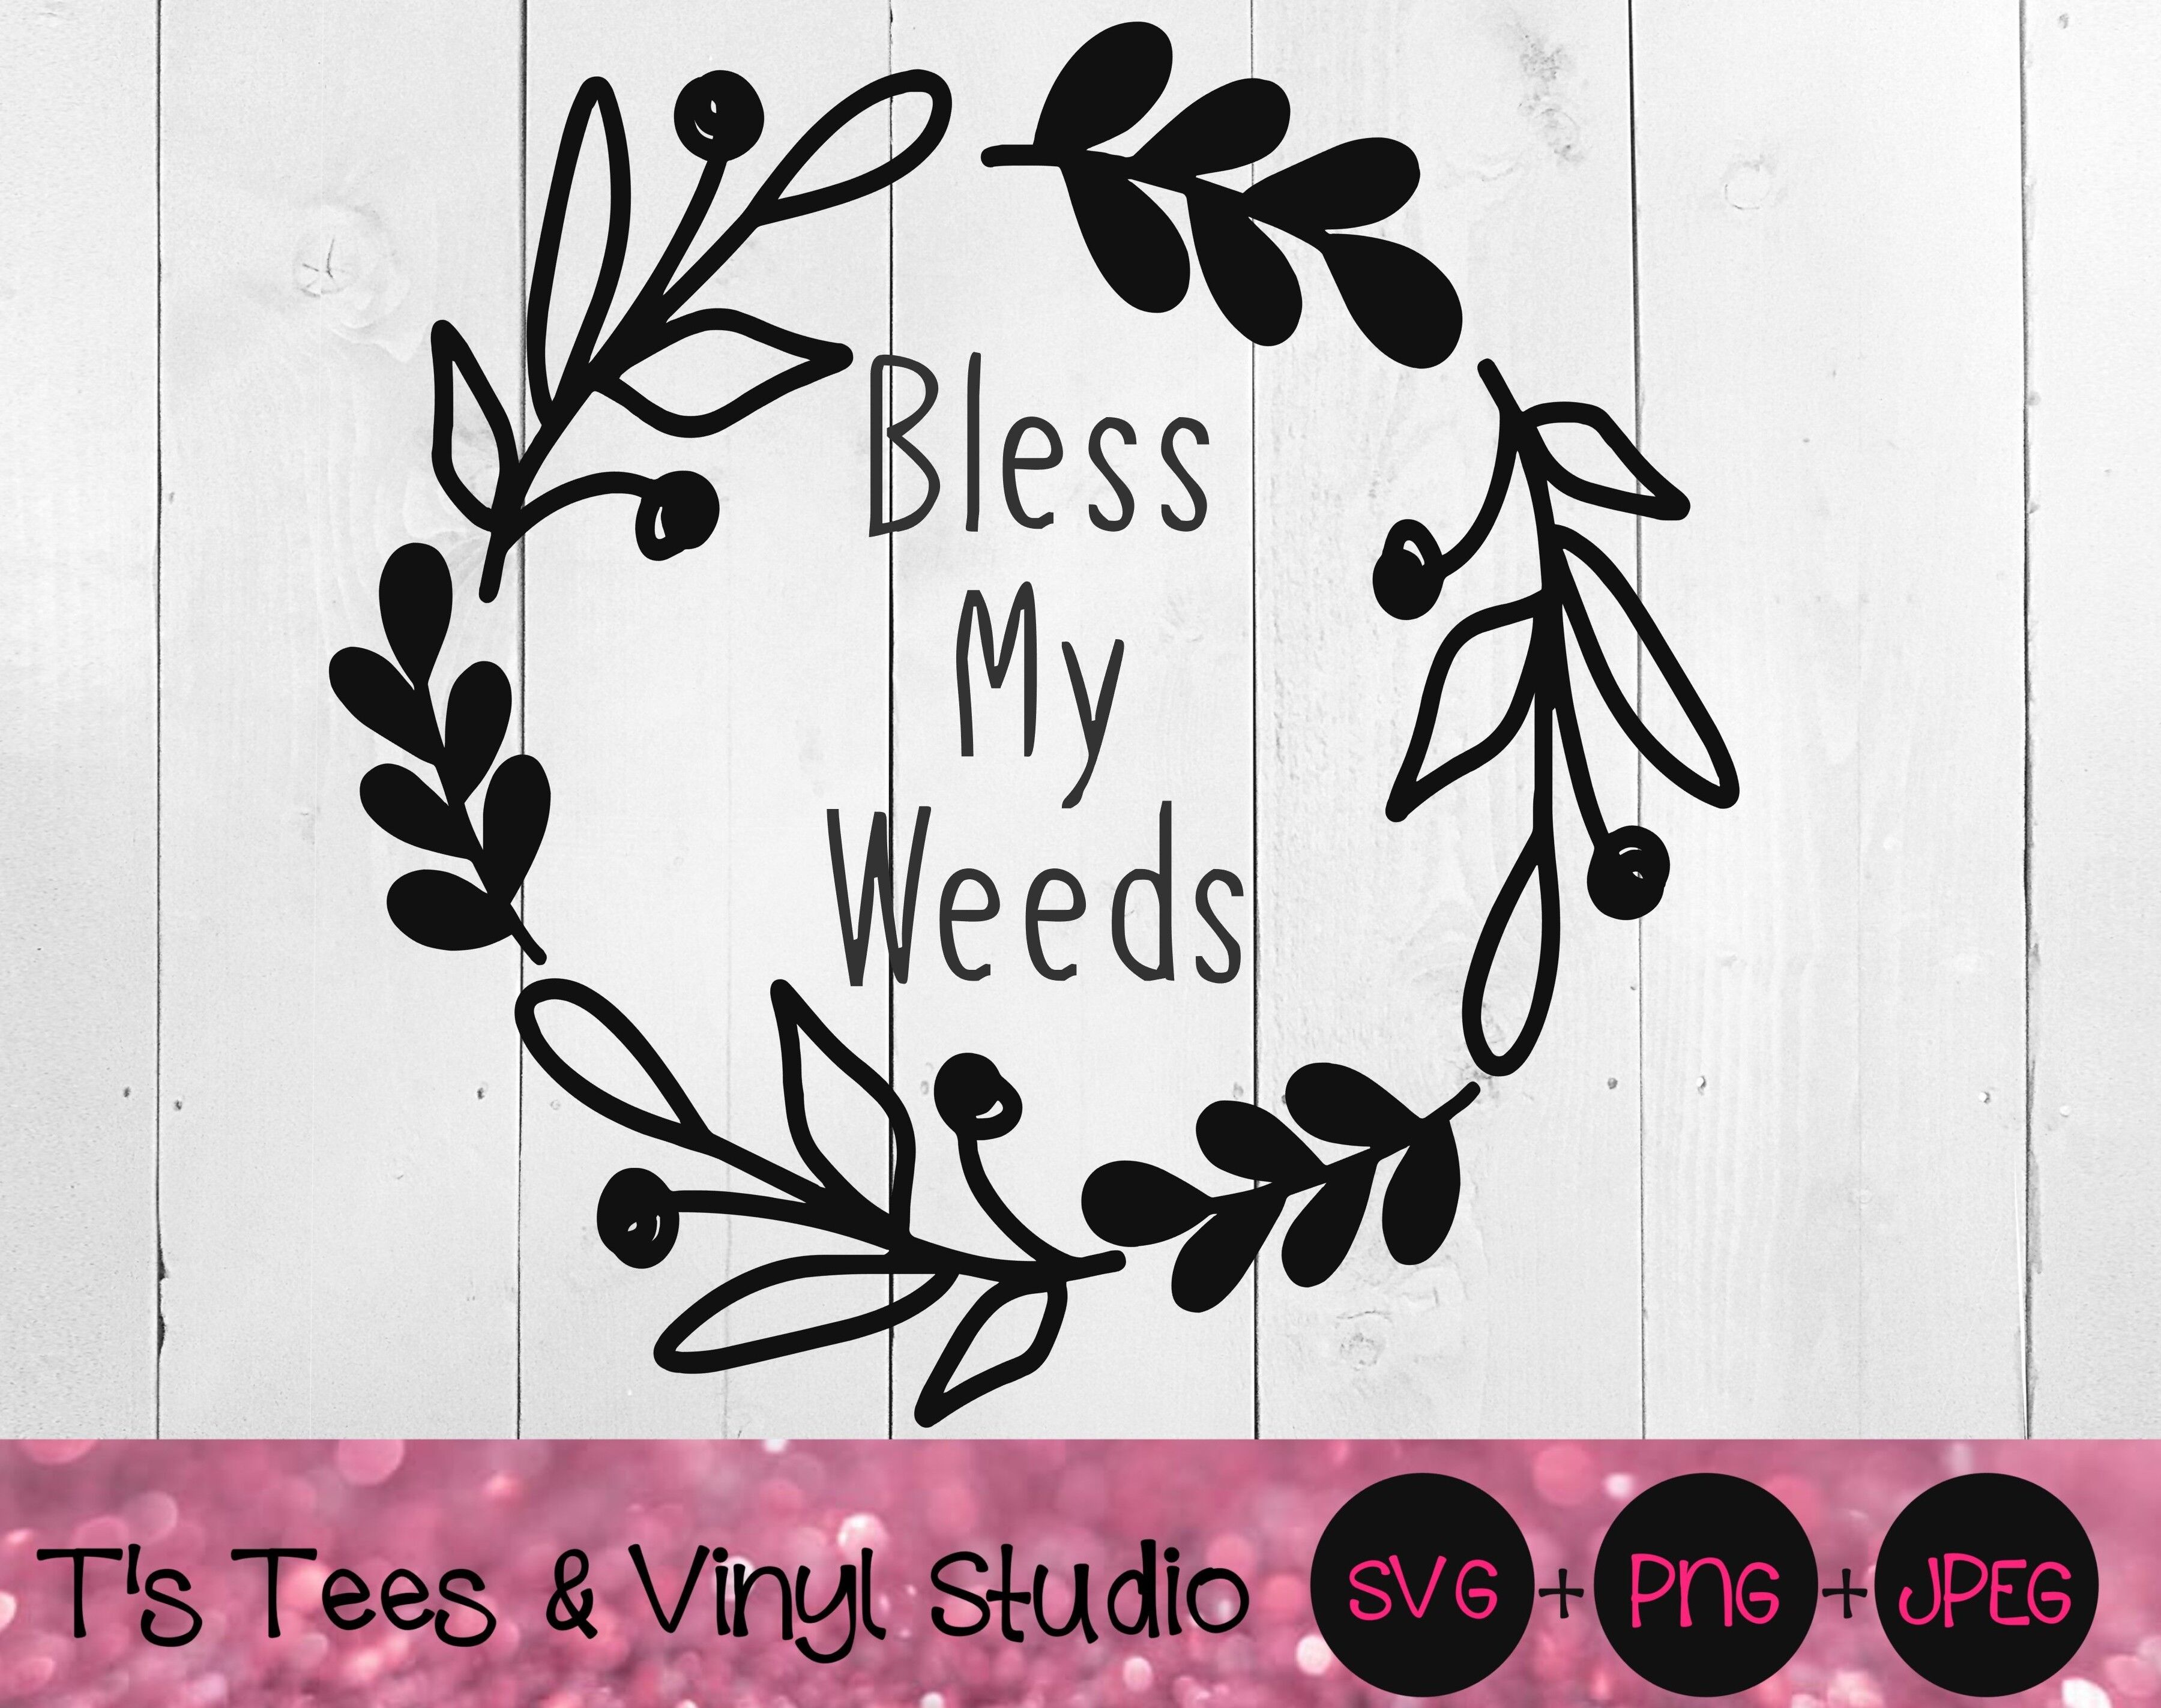 Download Weed Svg Weeds Svg Bless Svg Bless My Weeds Svg Garden Svg Plants By T S Tees Vinyl Studio Thehungryjpeg Com